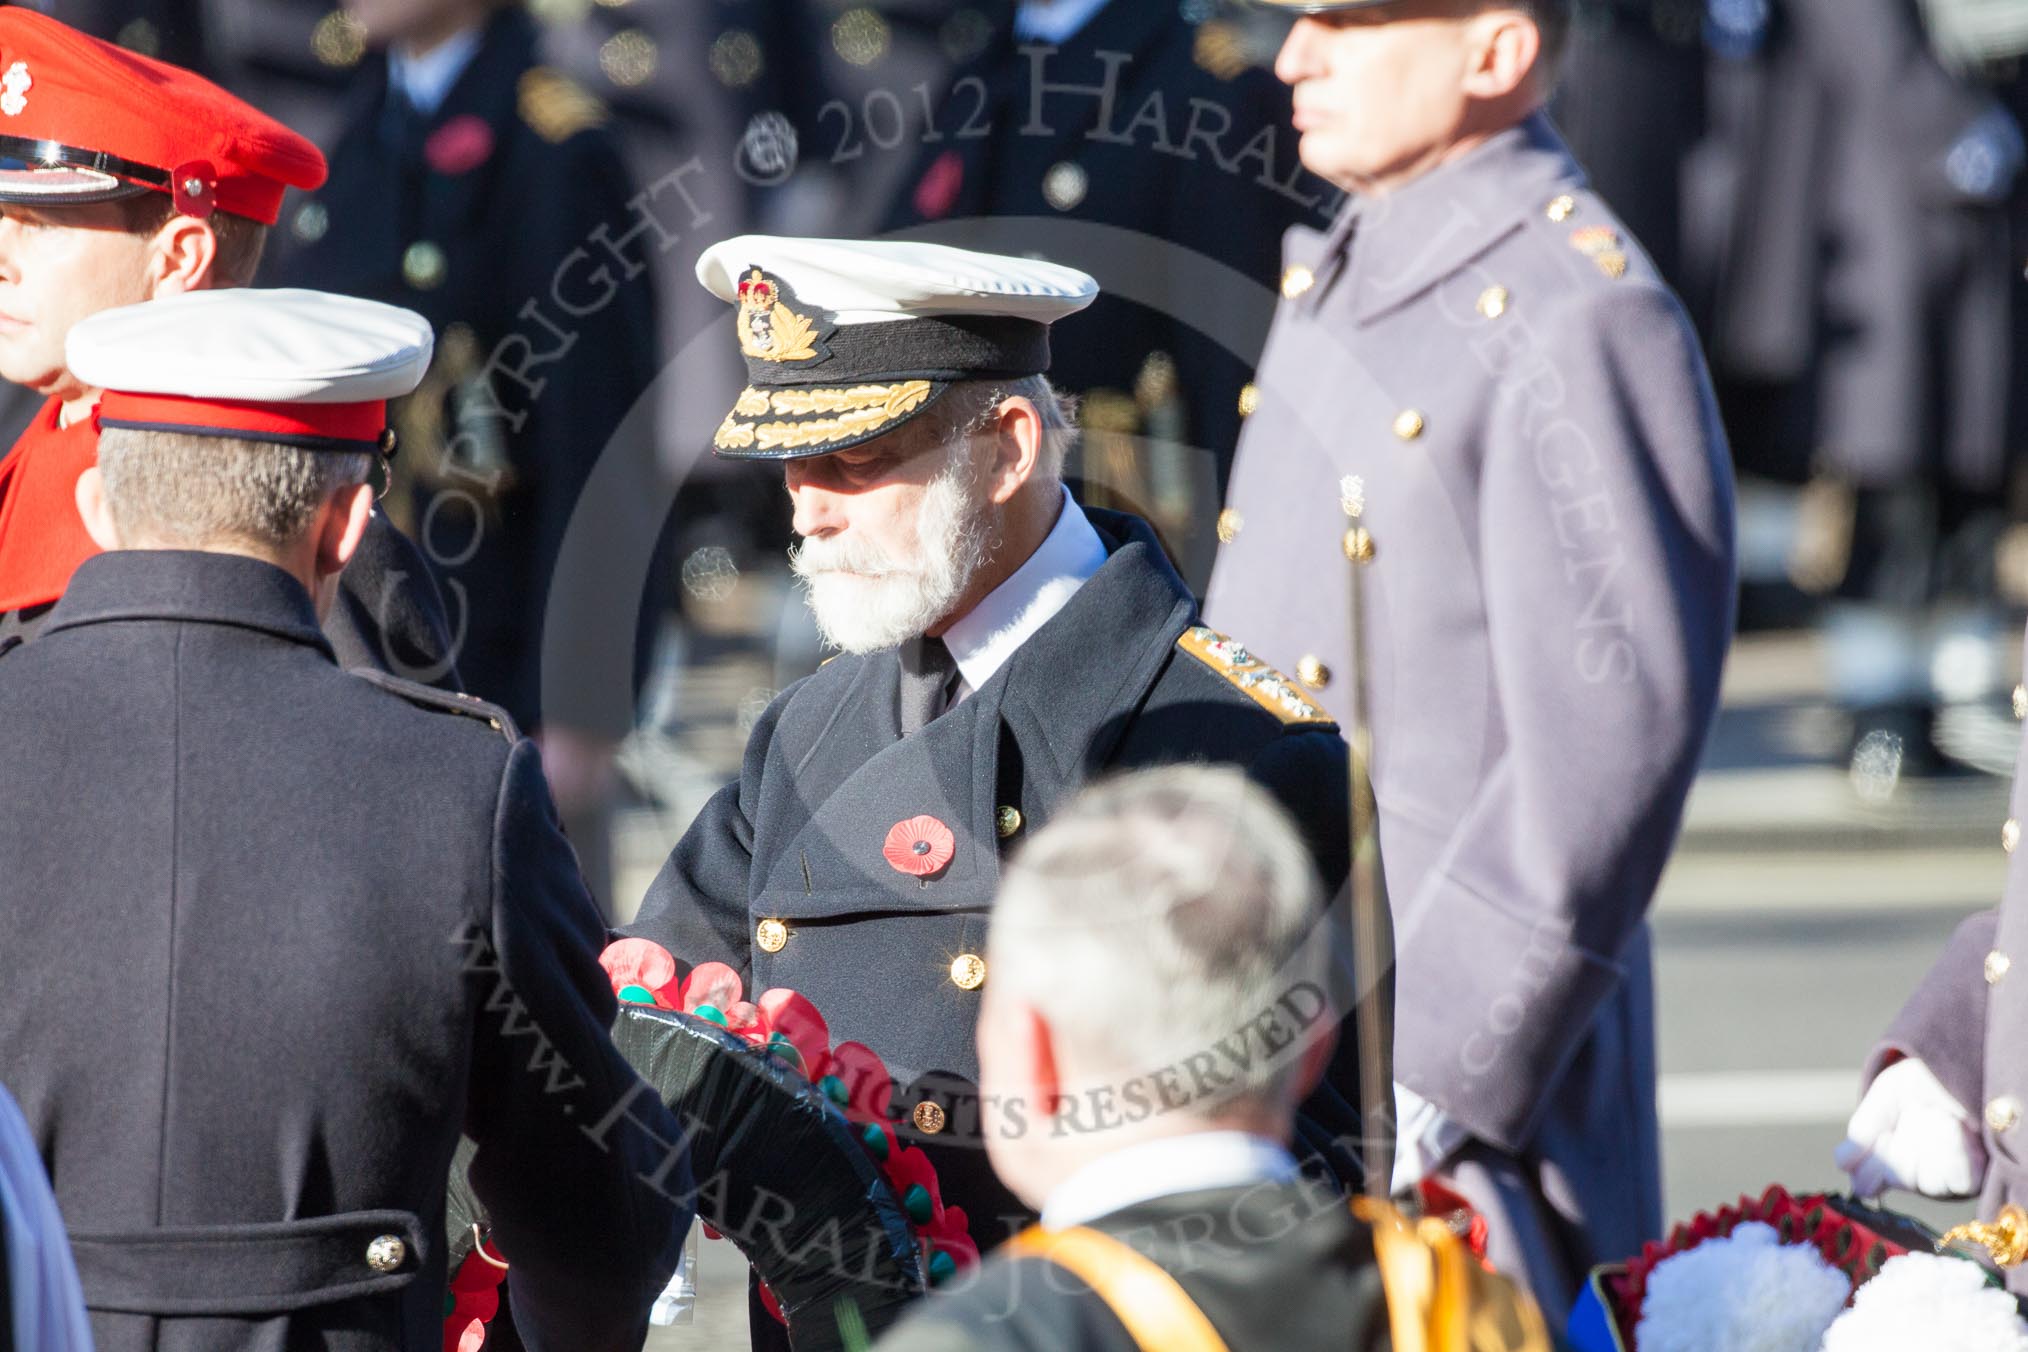 Major Fraser Smith as Equerry is handing the wreath to HRH Prince Michael of Kent.